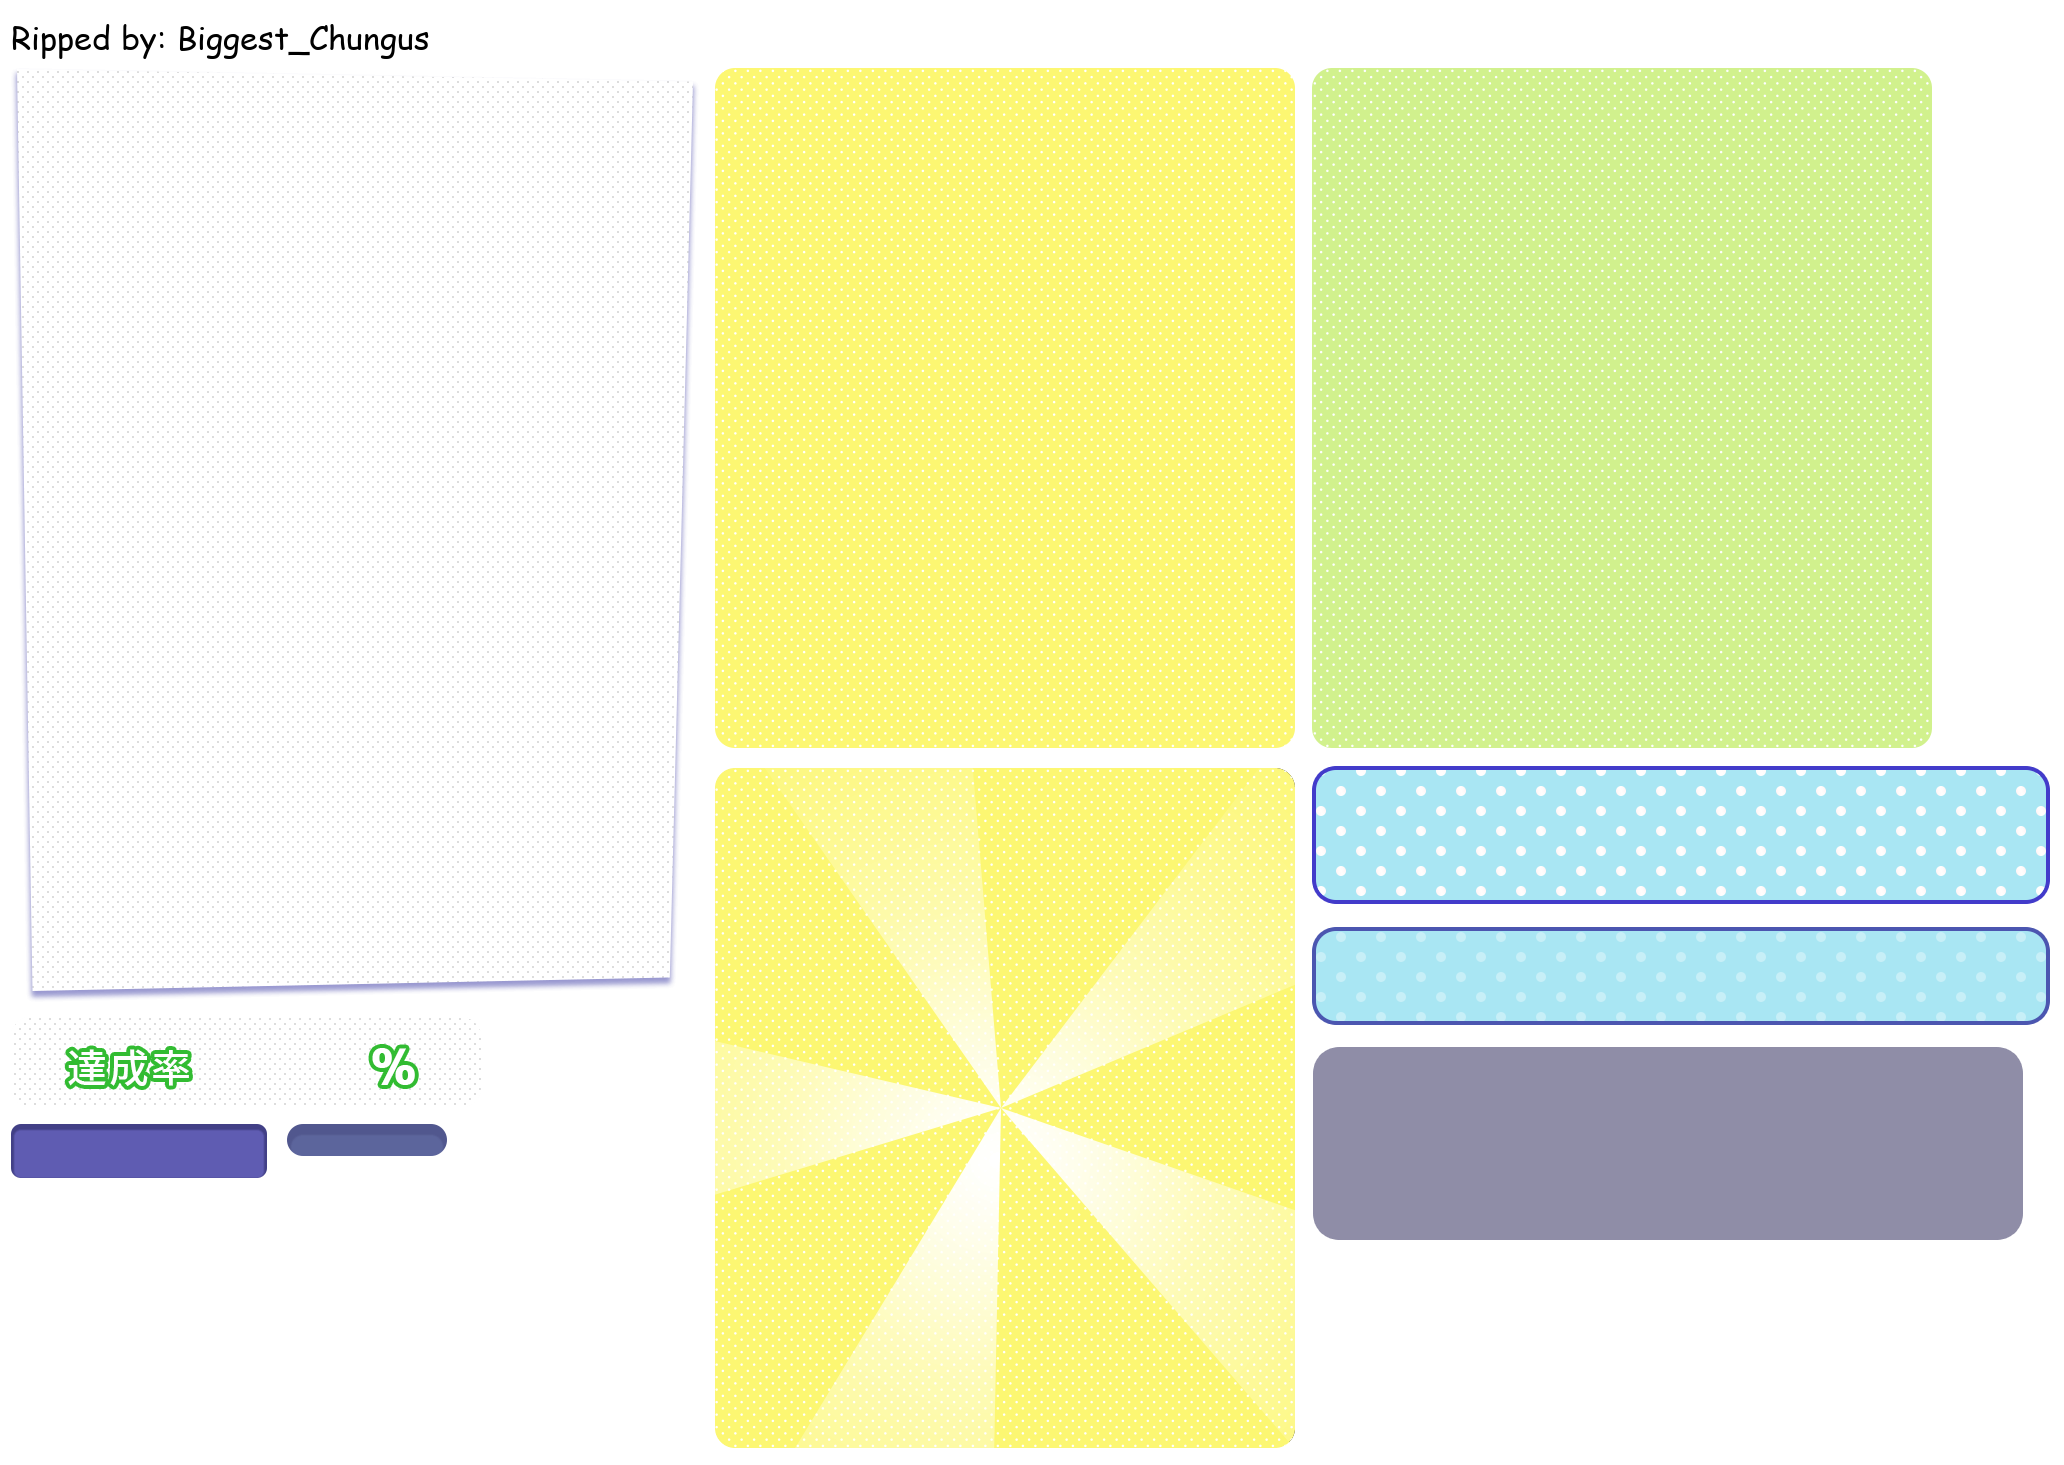 Matsuno Family Dependents - Backgrounds (Pop-up Windows)